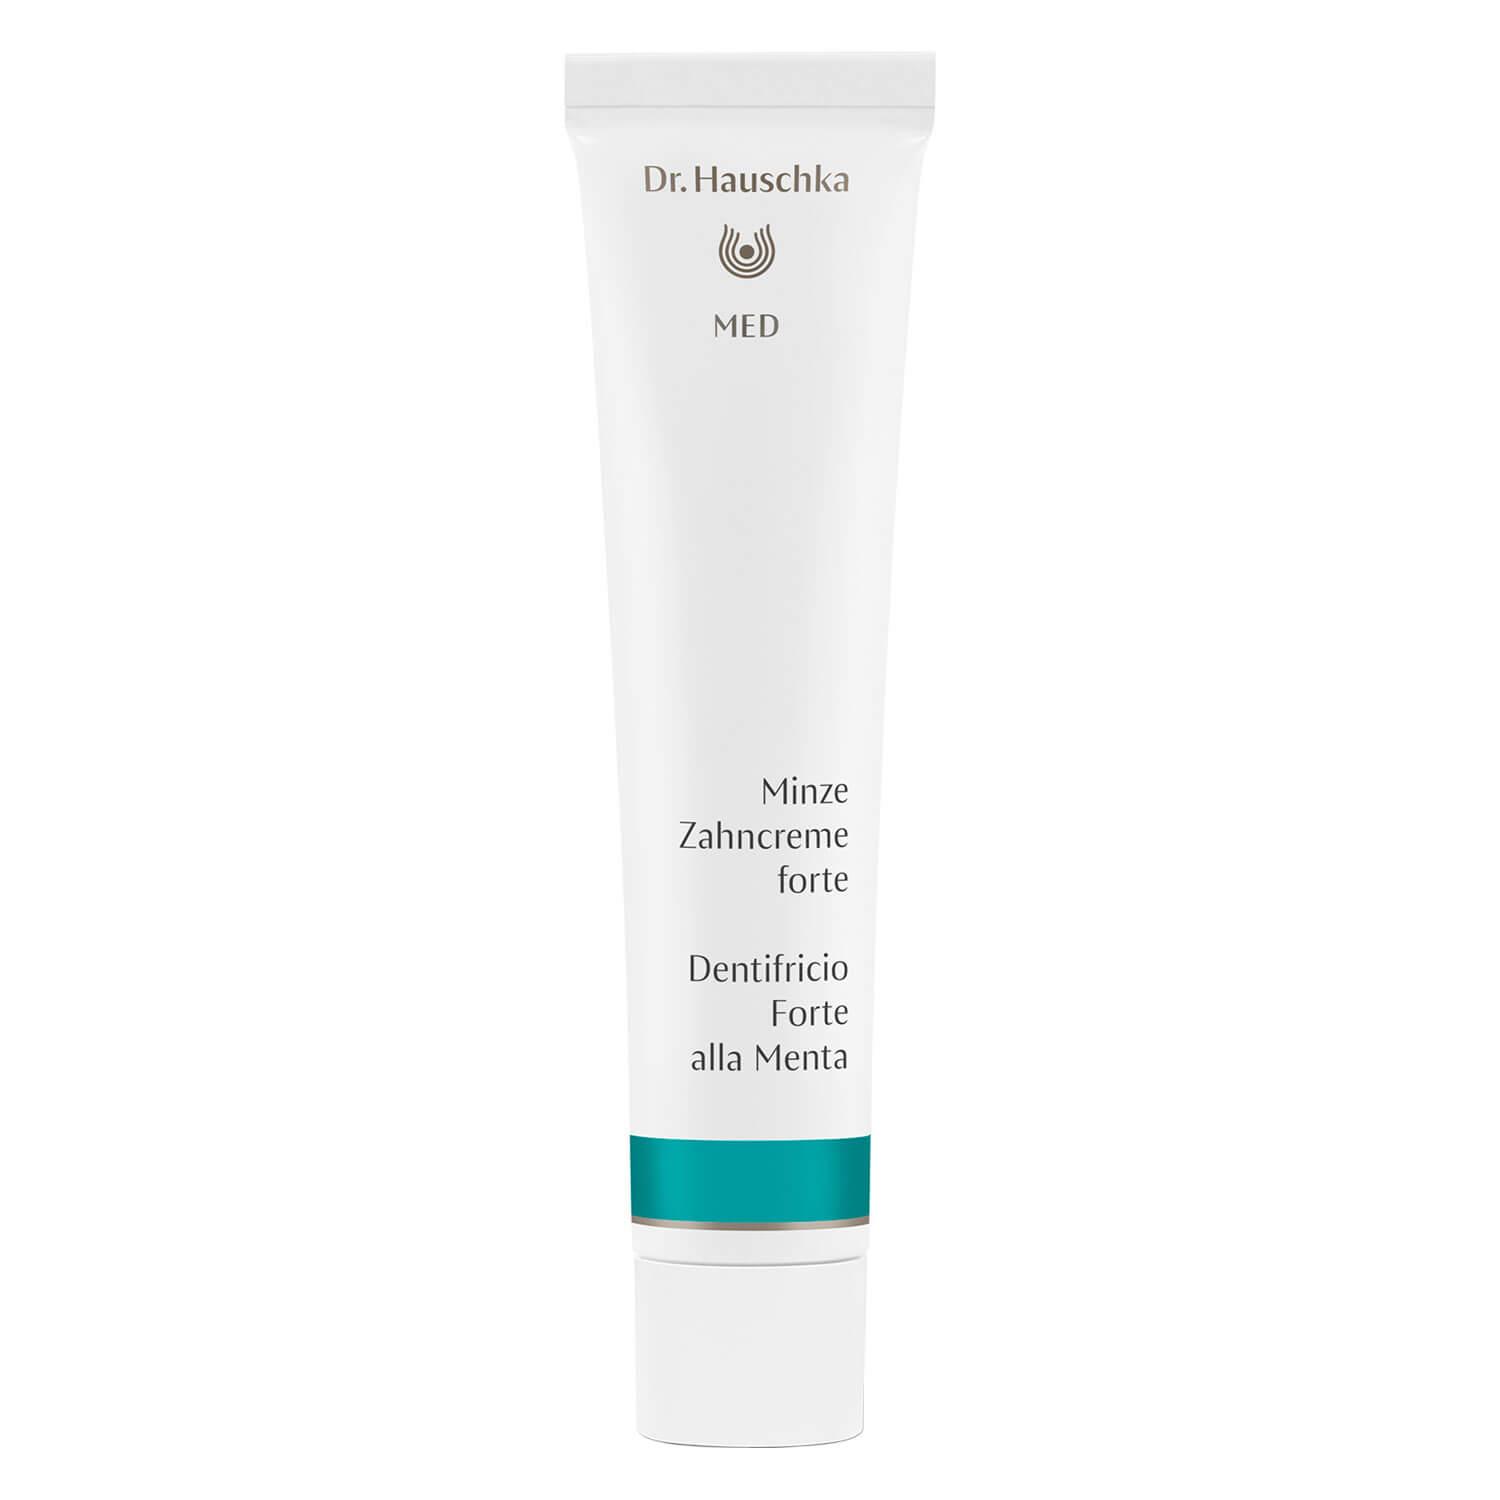 Dr. Hauschka MED - Fortifying Mint Toothpaste